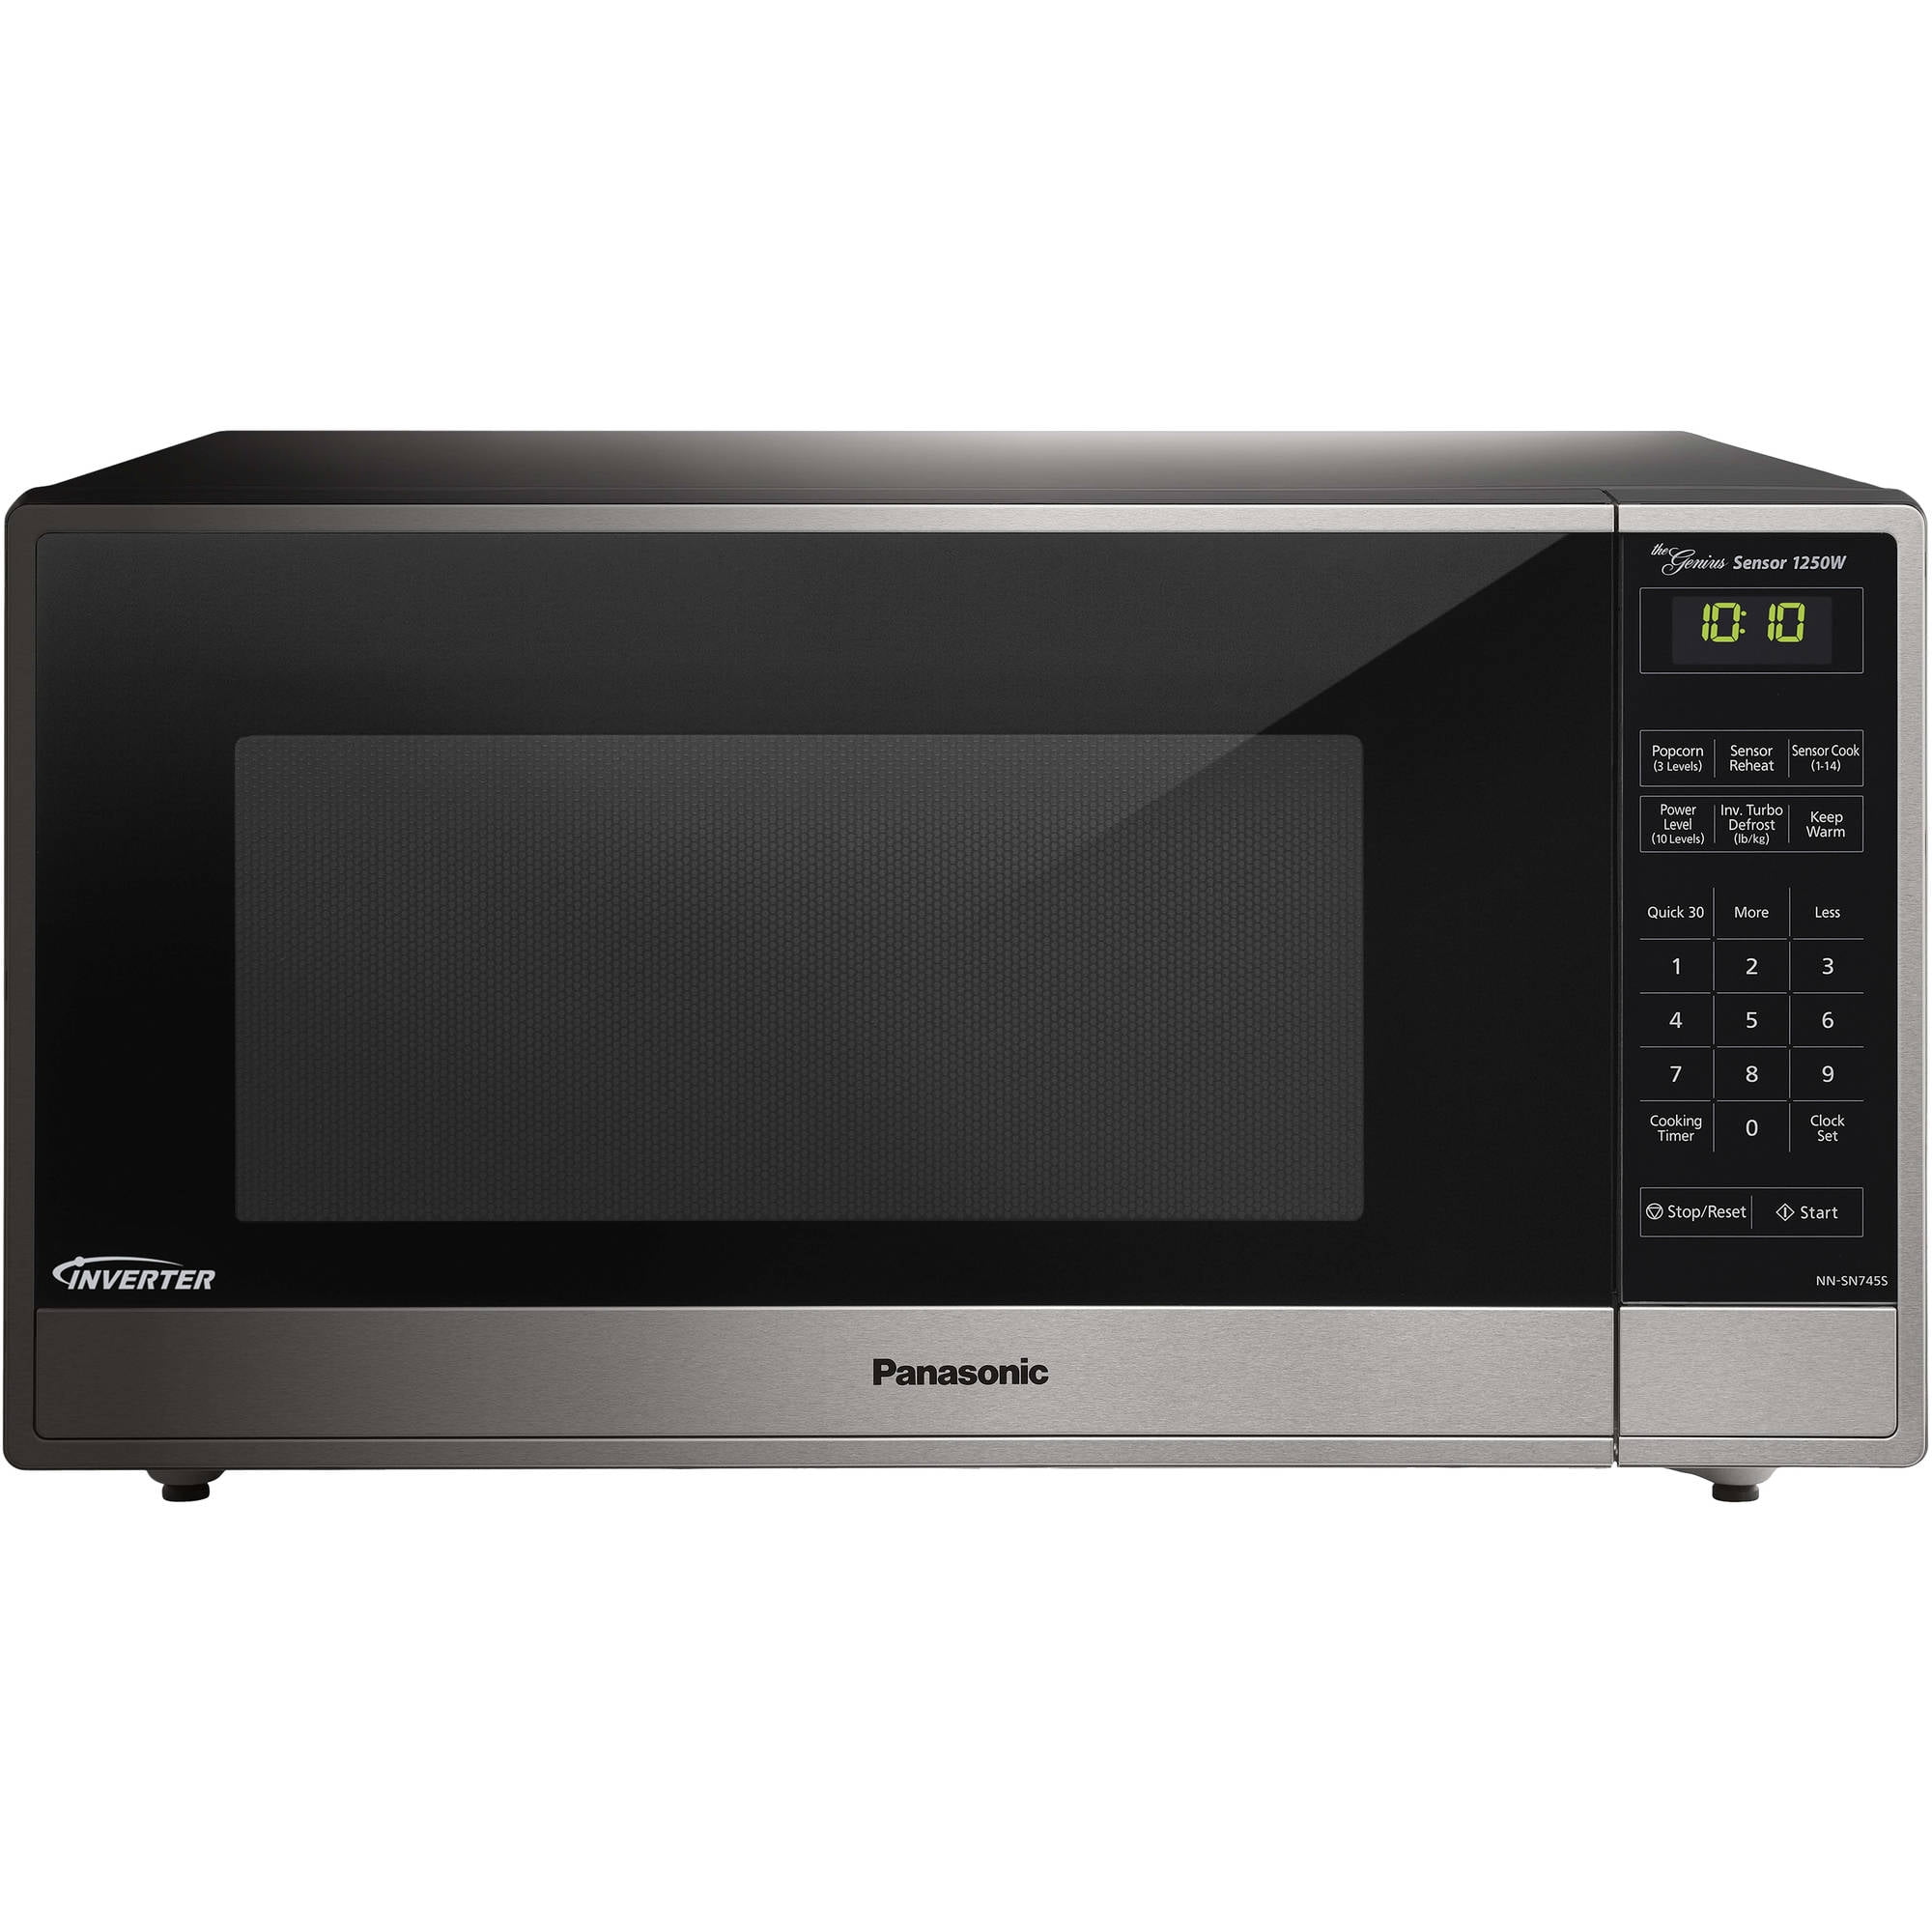 Panasonic 1.6 cu ft Microwave Oven with Inverter Technology, Silver